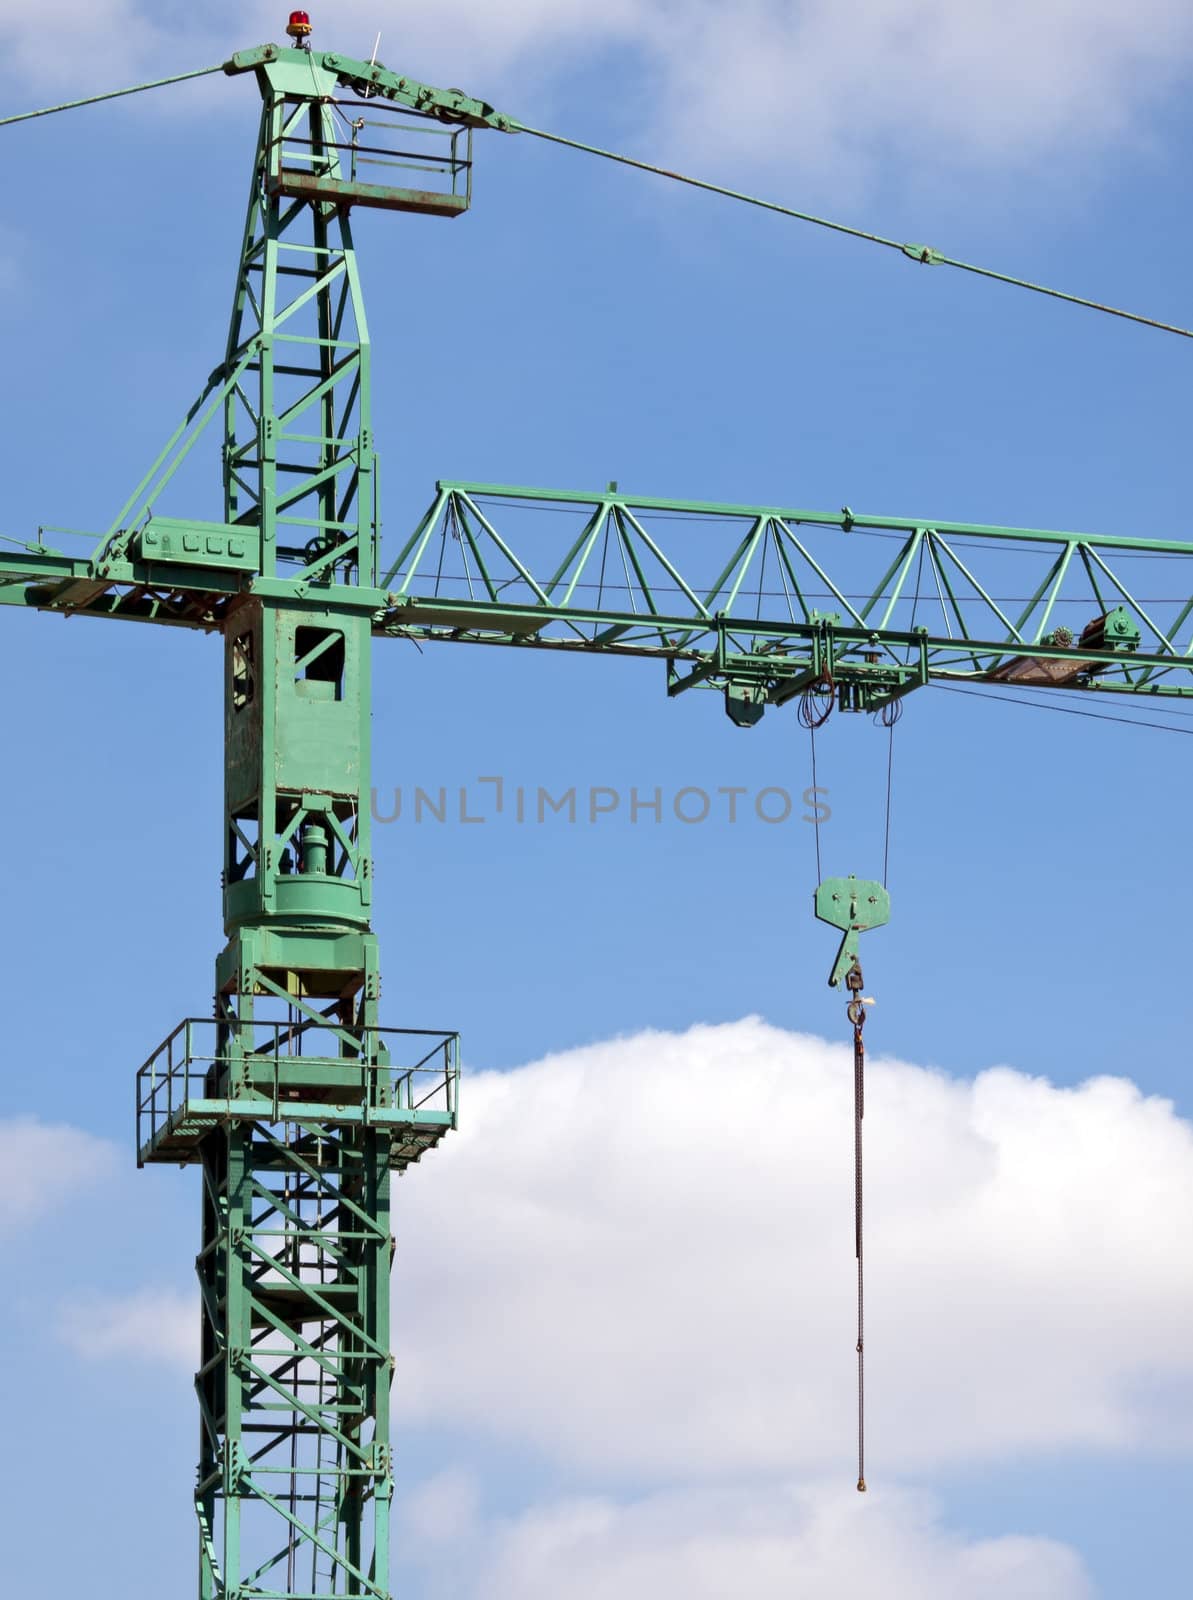 Tower Crane by PhotoWorks